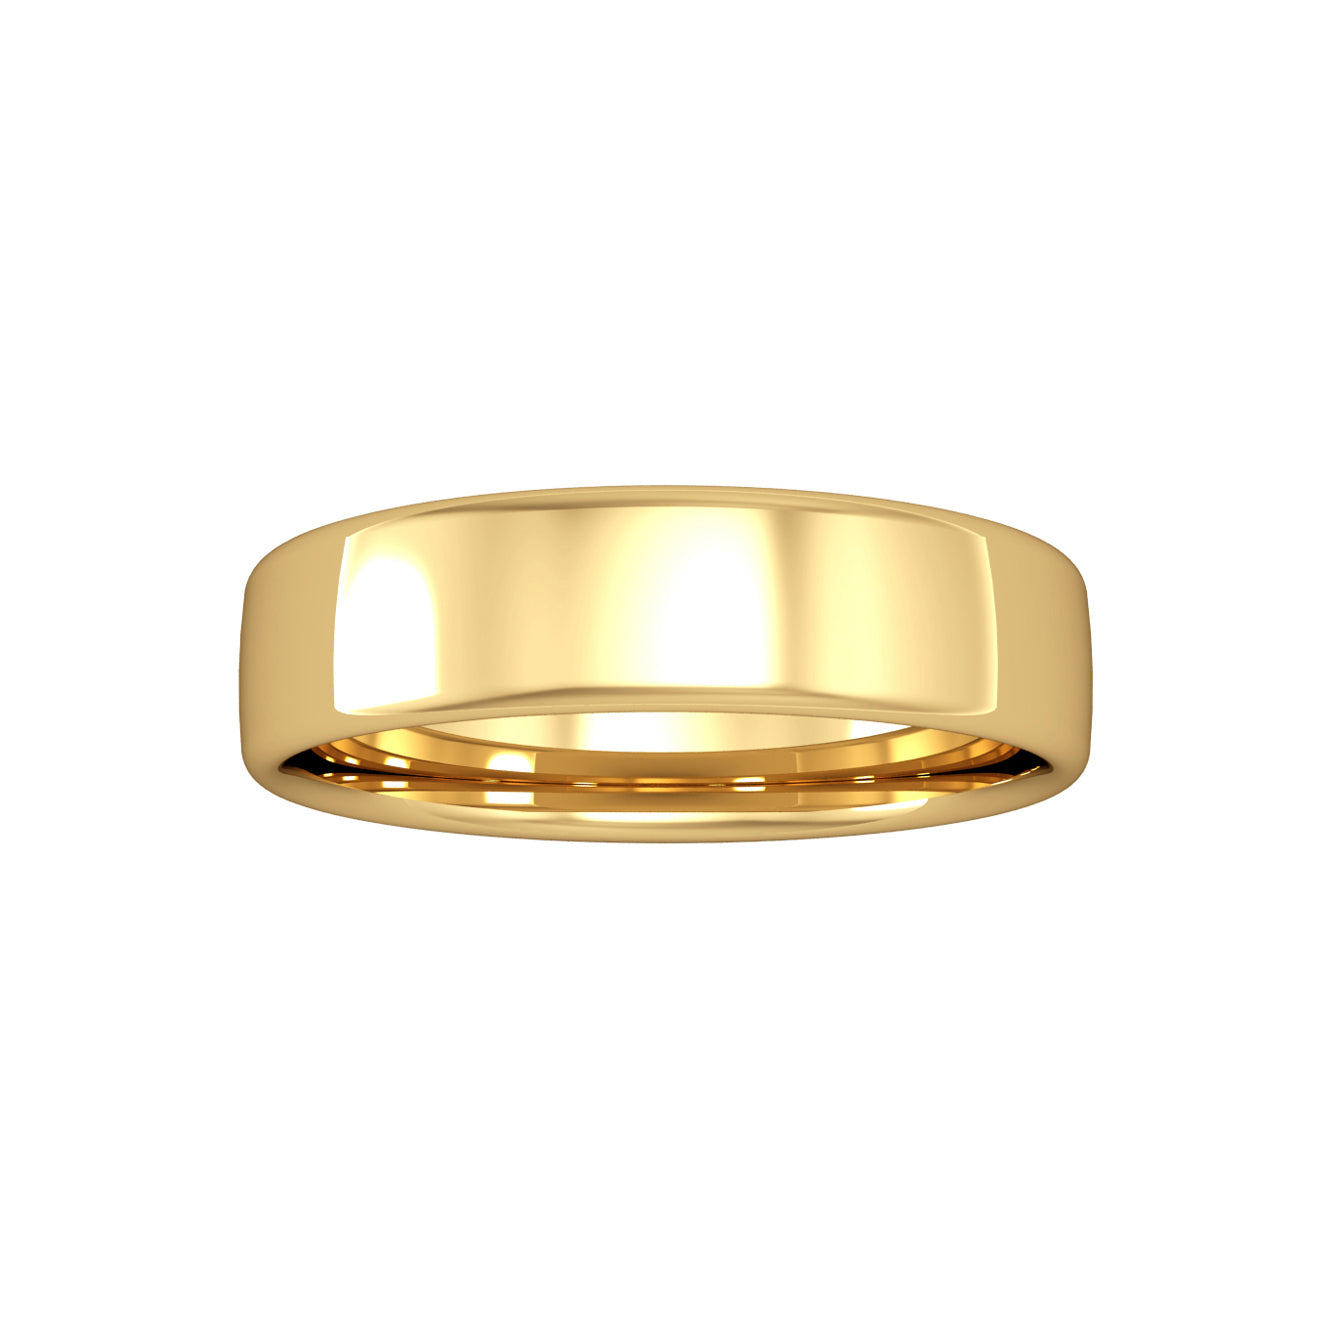 18ct Gold  5mm Bombe Court Wedding Band Commitment Ring - RBNR02462